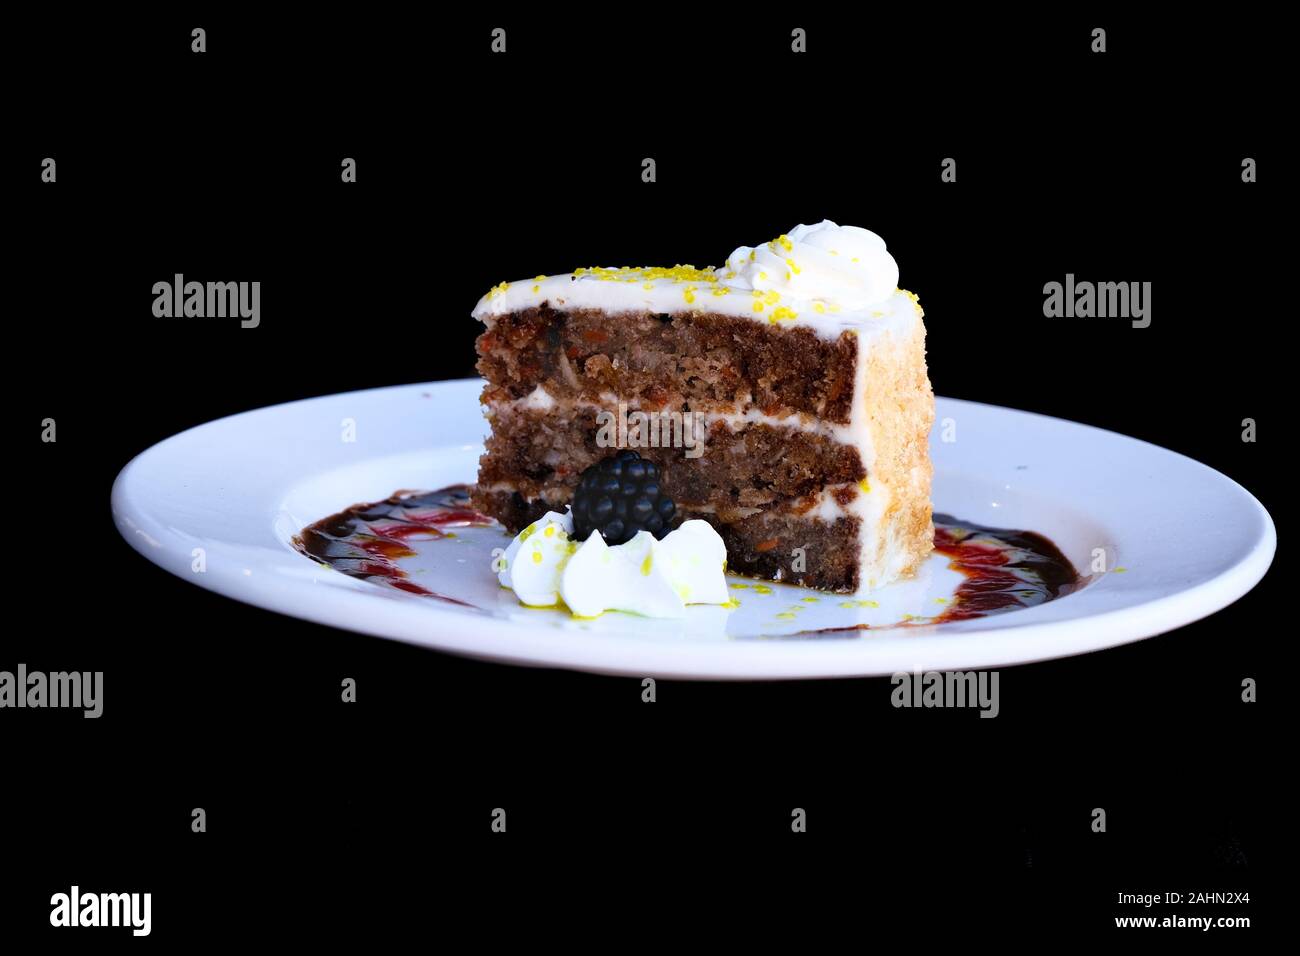 Carrot Cake on Plate Stock Photo